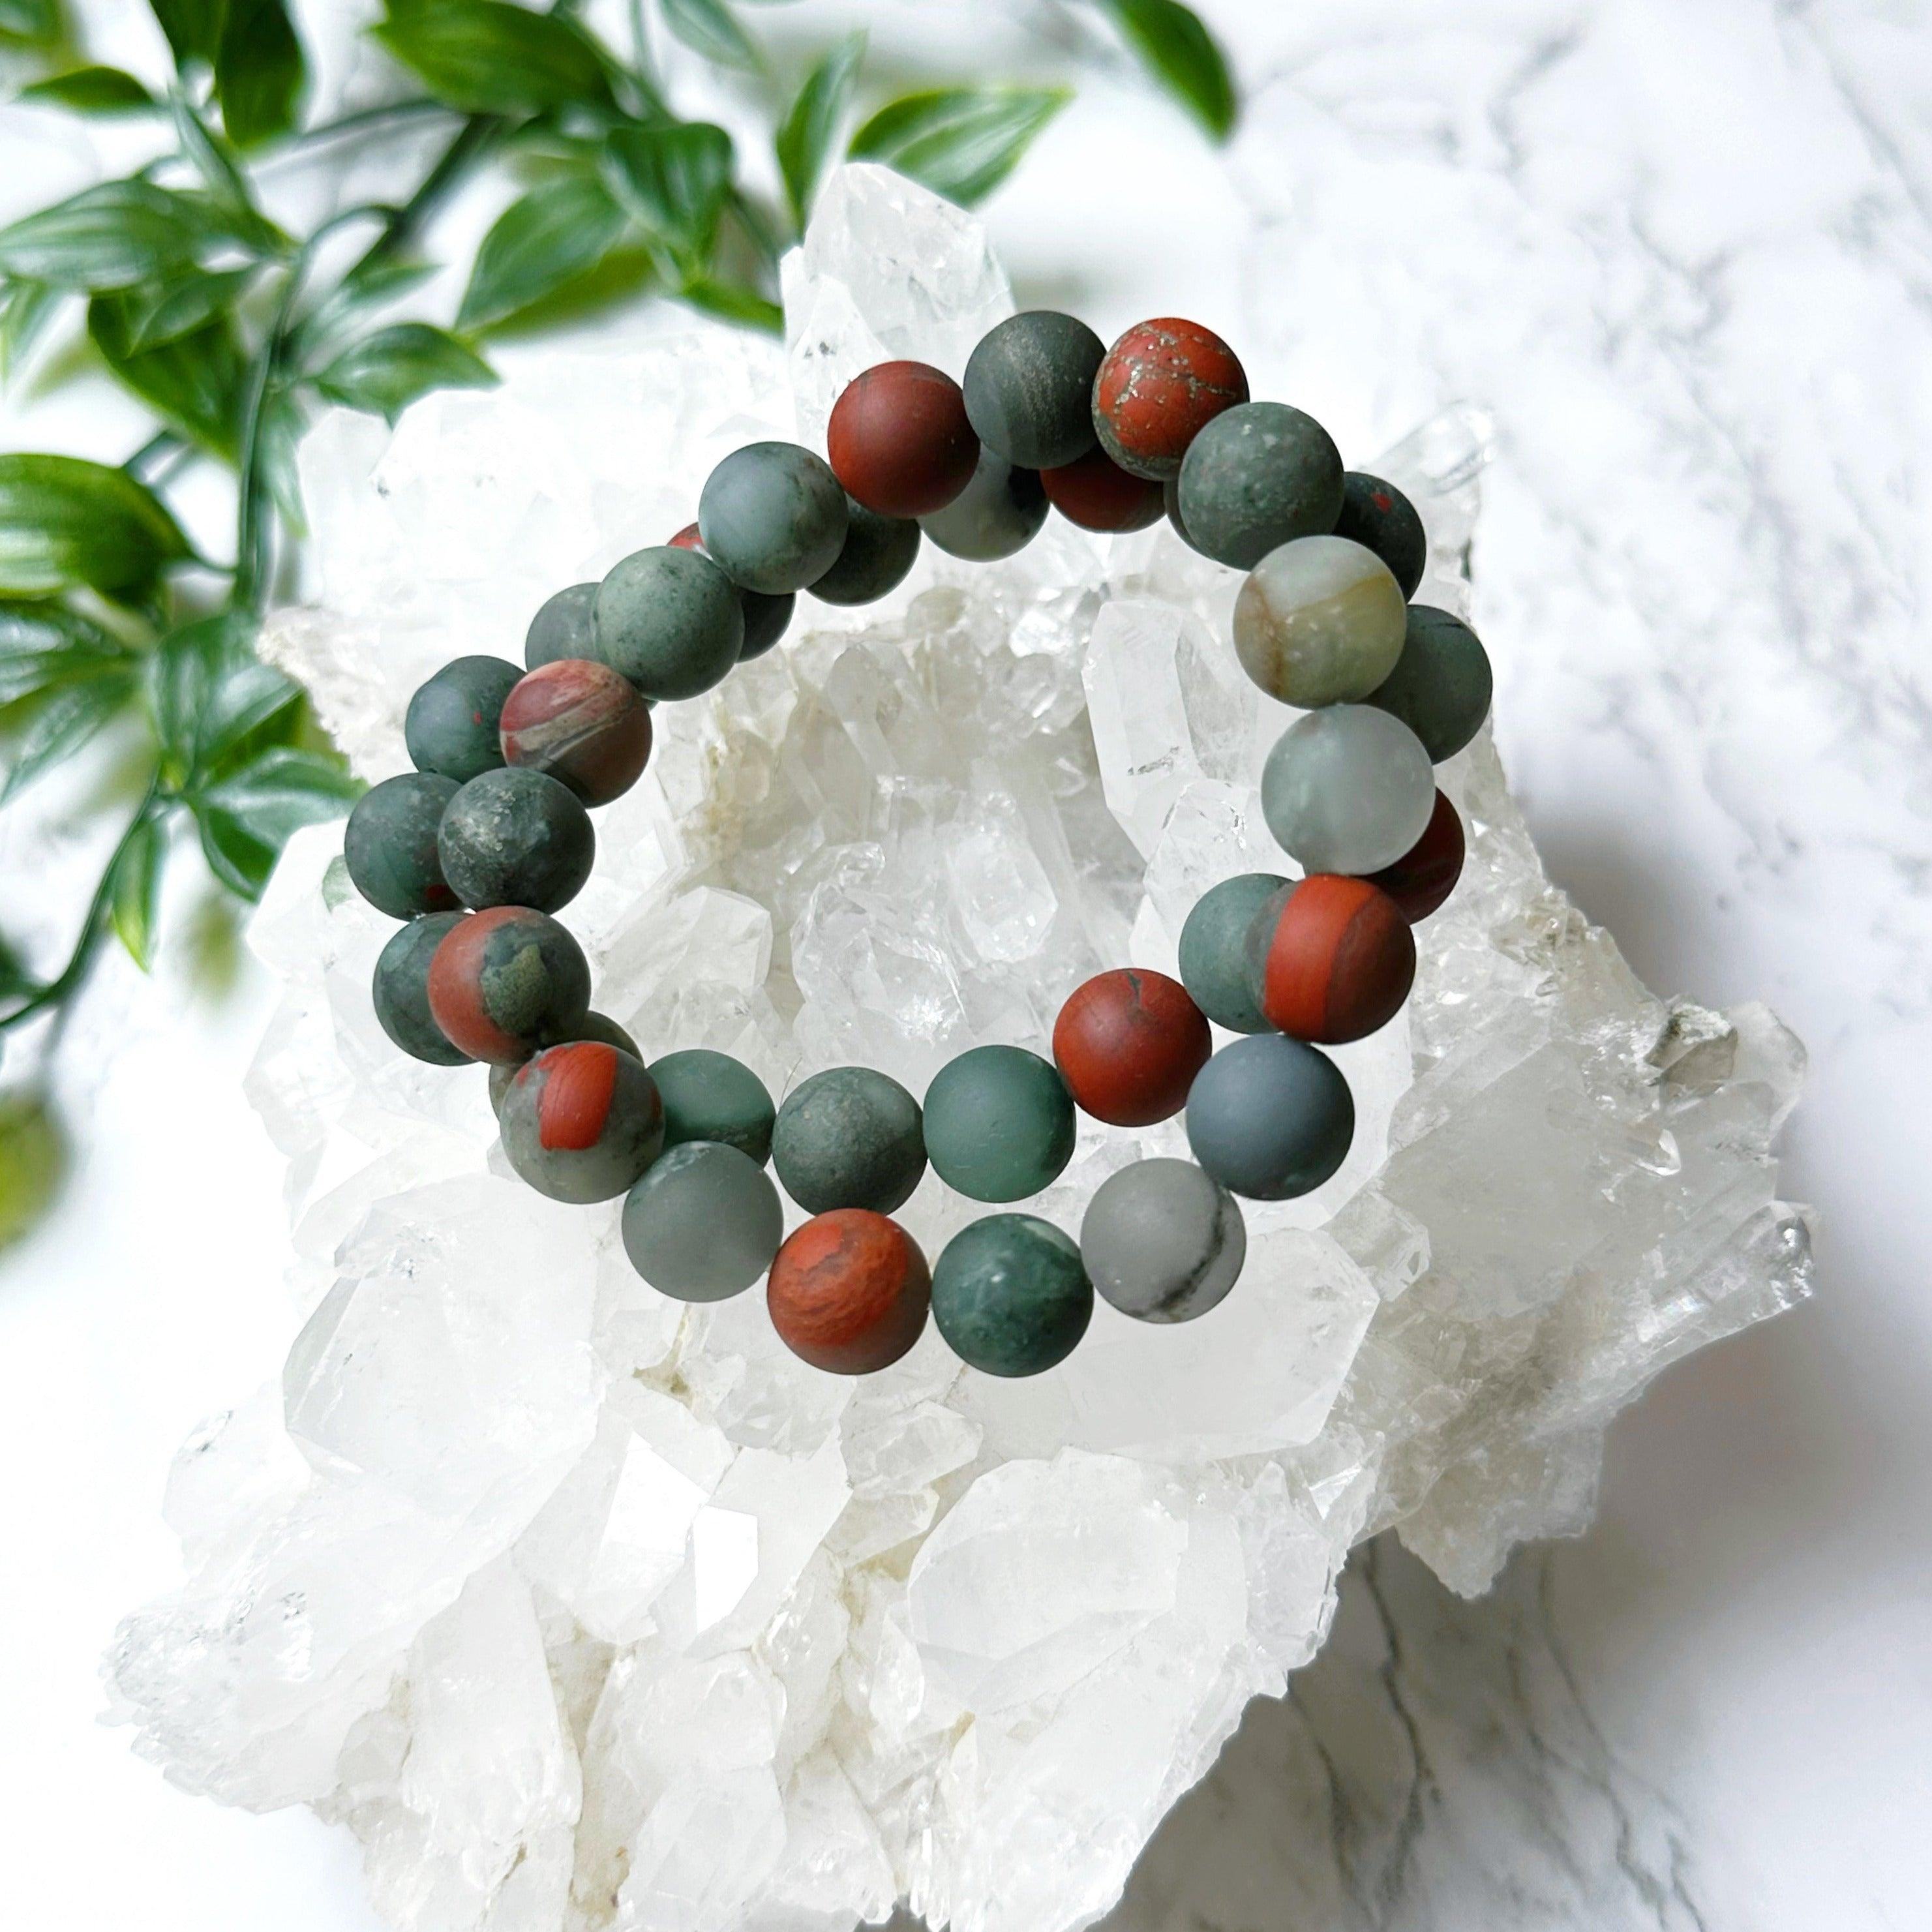 AFRICAN BLOODSTONE (MATTE) 10mm - HANDMADE CRYSTAL BRACELET - 10mm, African bloodstone, Aries, aries stack, bracelet, crystal bracelet, earth, emotional support, handmade bracelet, jewelry, june wrist candy, libra, libra stack, market bracelet, matte, mixed colors, pisces, pisces stack, protection gift bundle, recently added, restocked, scorpio stack, summer wrist candy, Wearable - The Mineral Maven